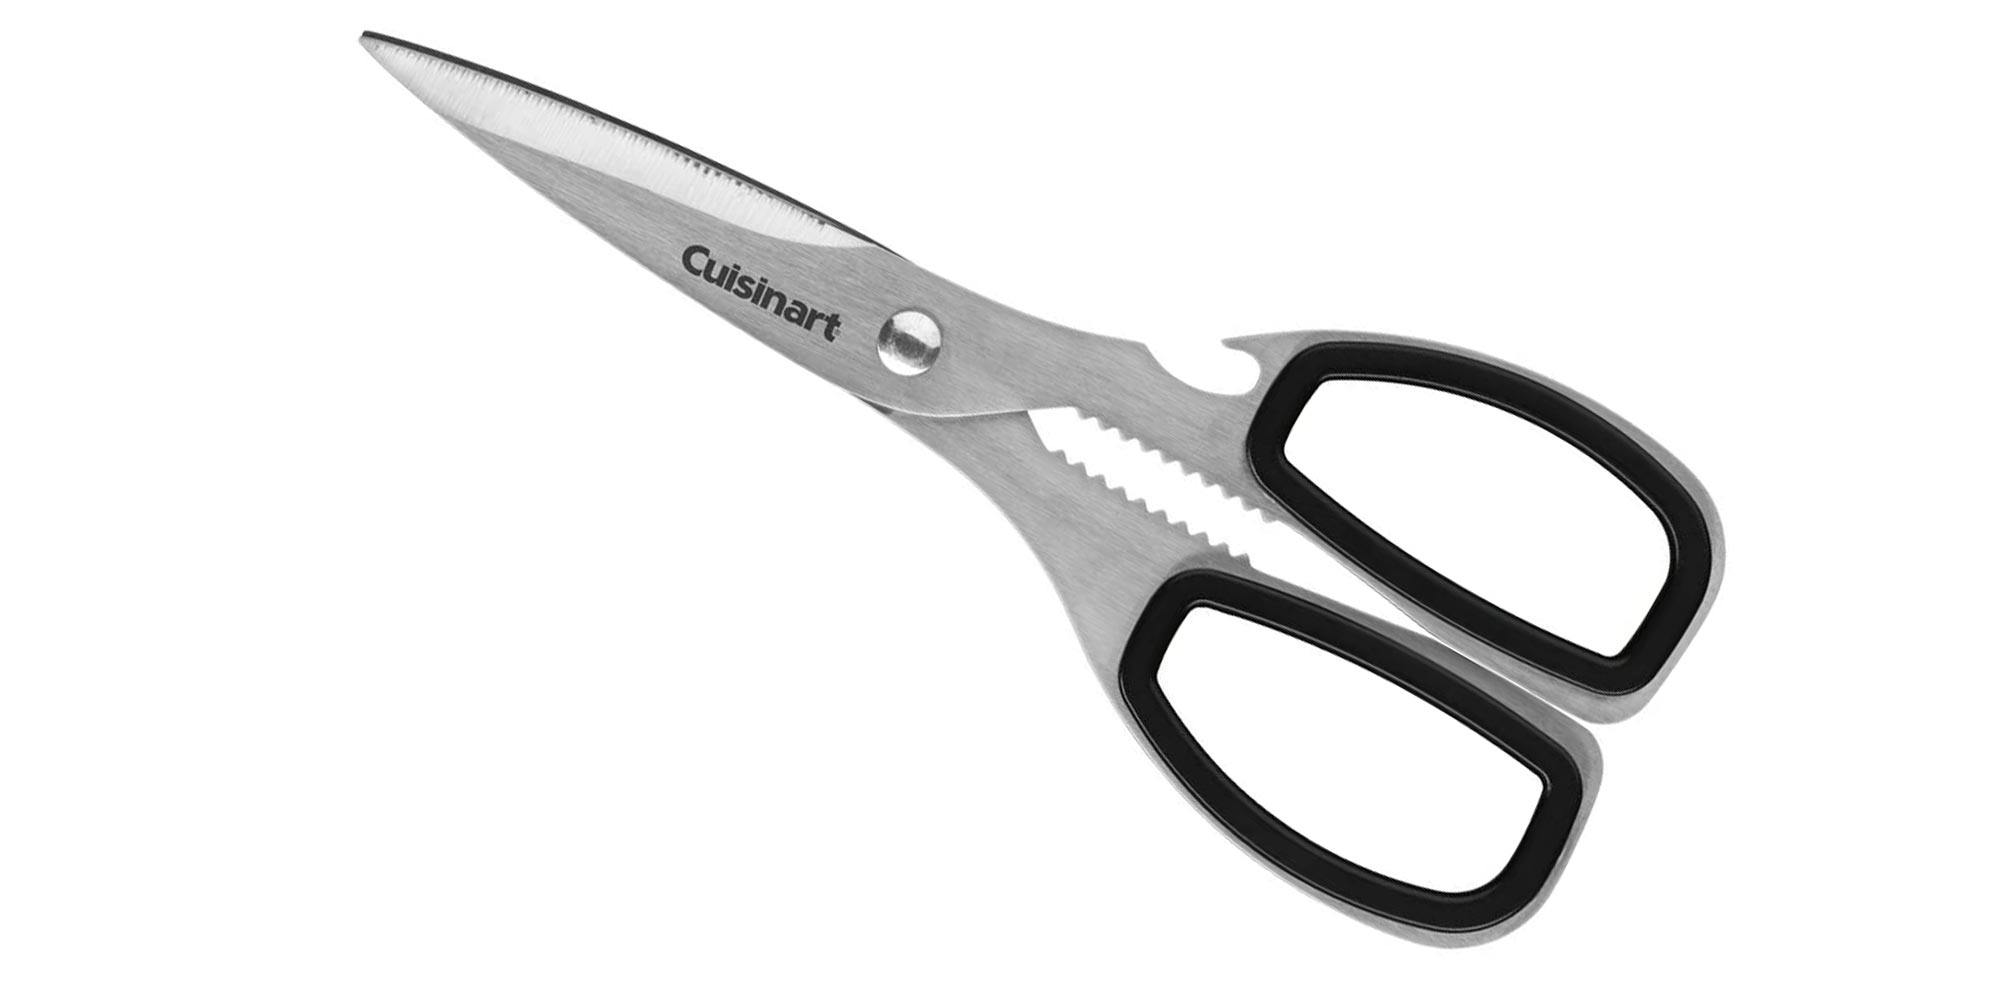 https://9to5toys.com/wp-content/uploads/sites/5/2021/04/cuisinart-kitchen-shears.jpg